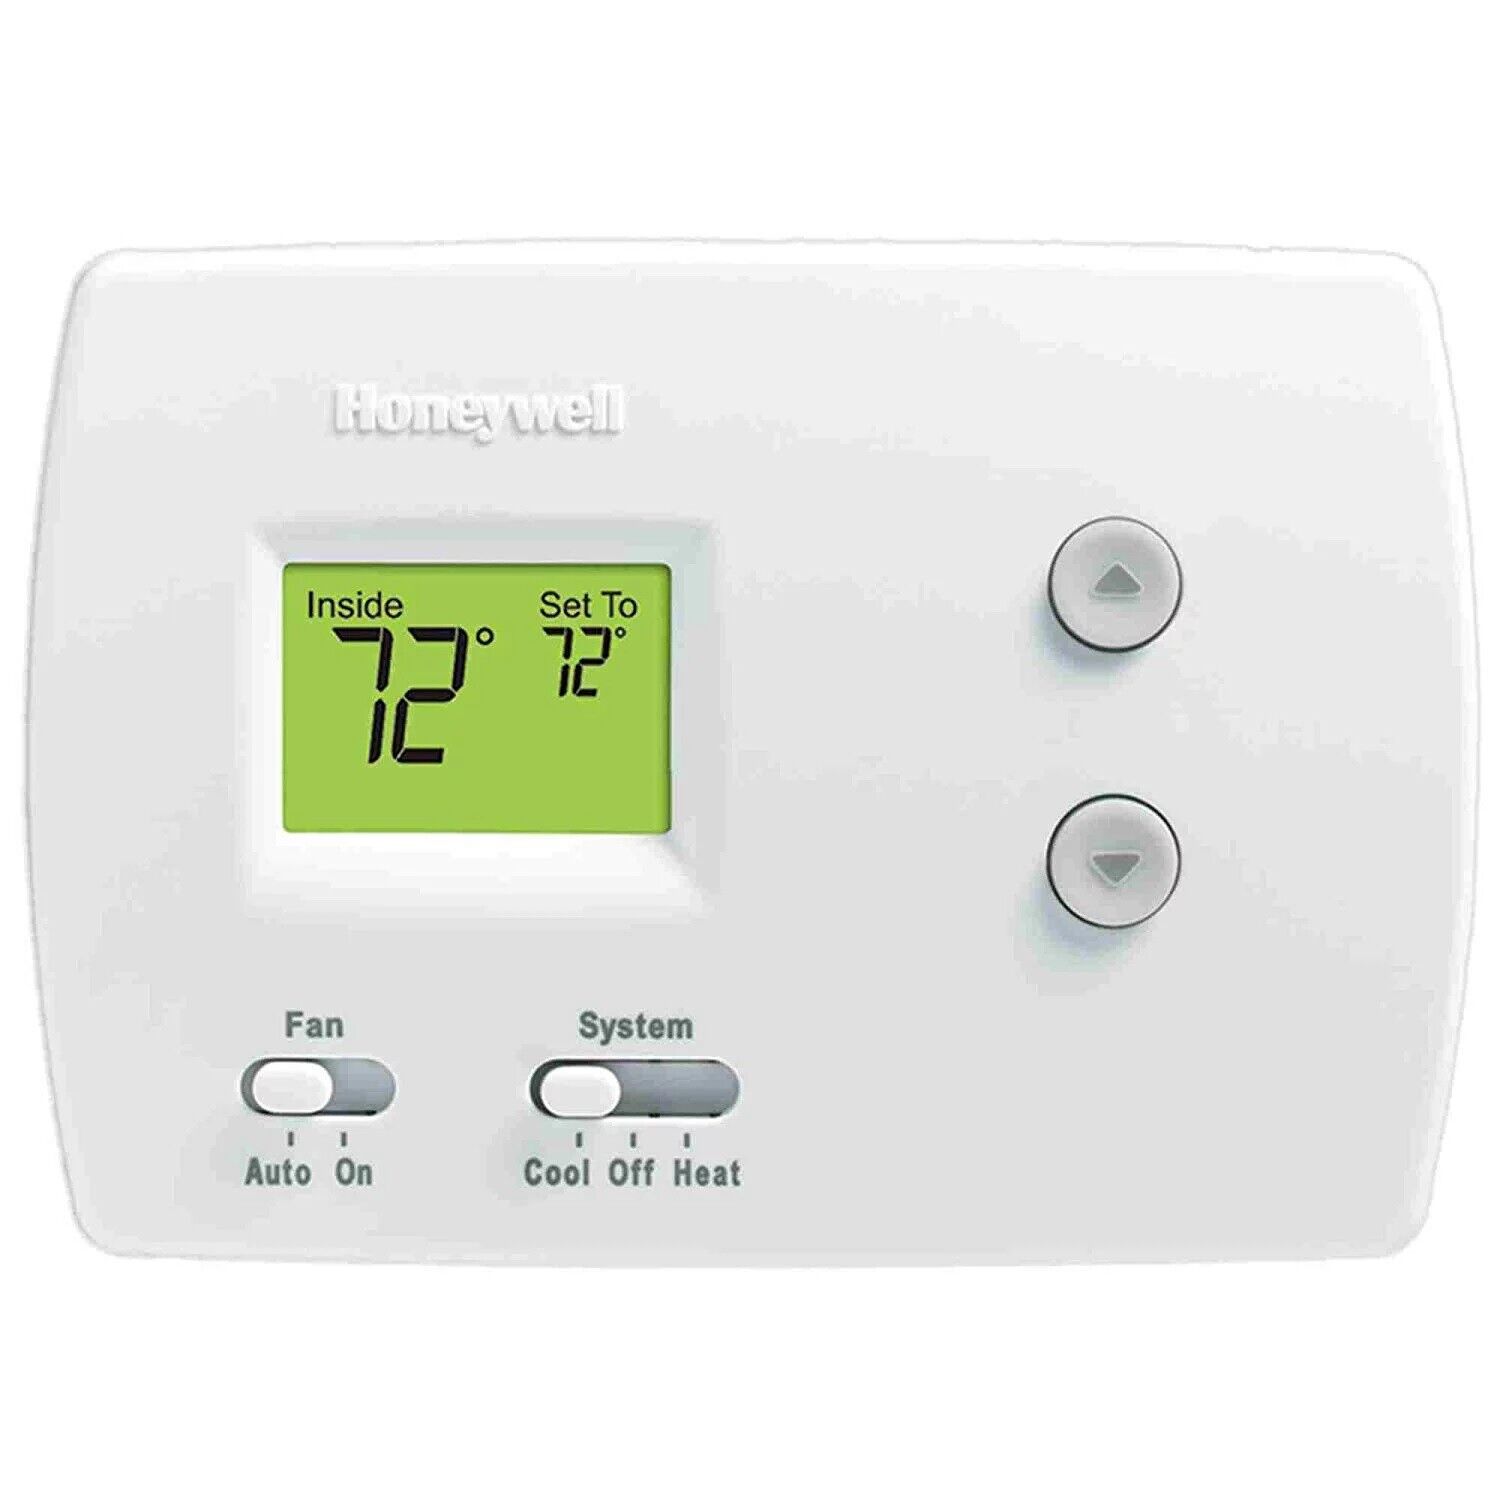 Honeywell TH3110D1008 Pro Non-Programmable Digital Thermostat White